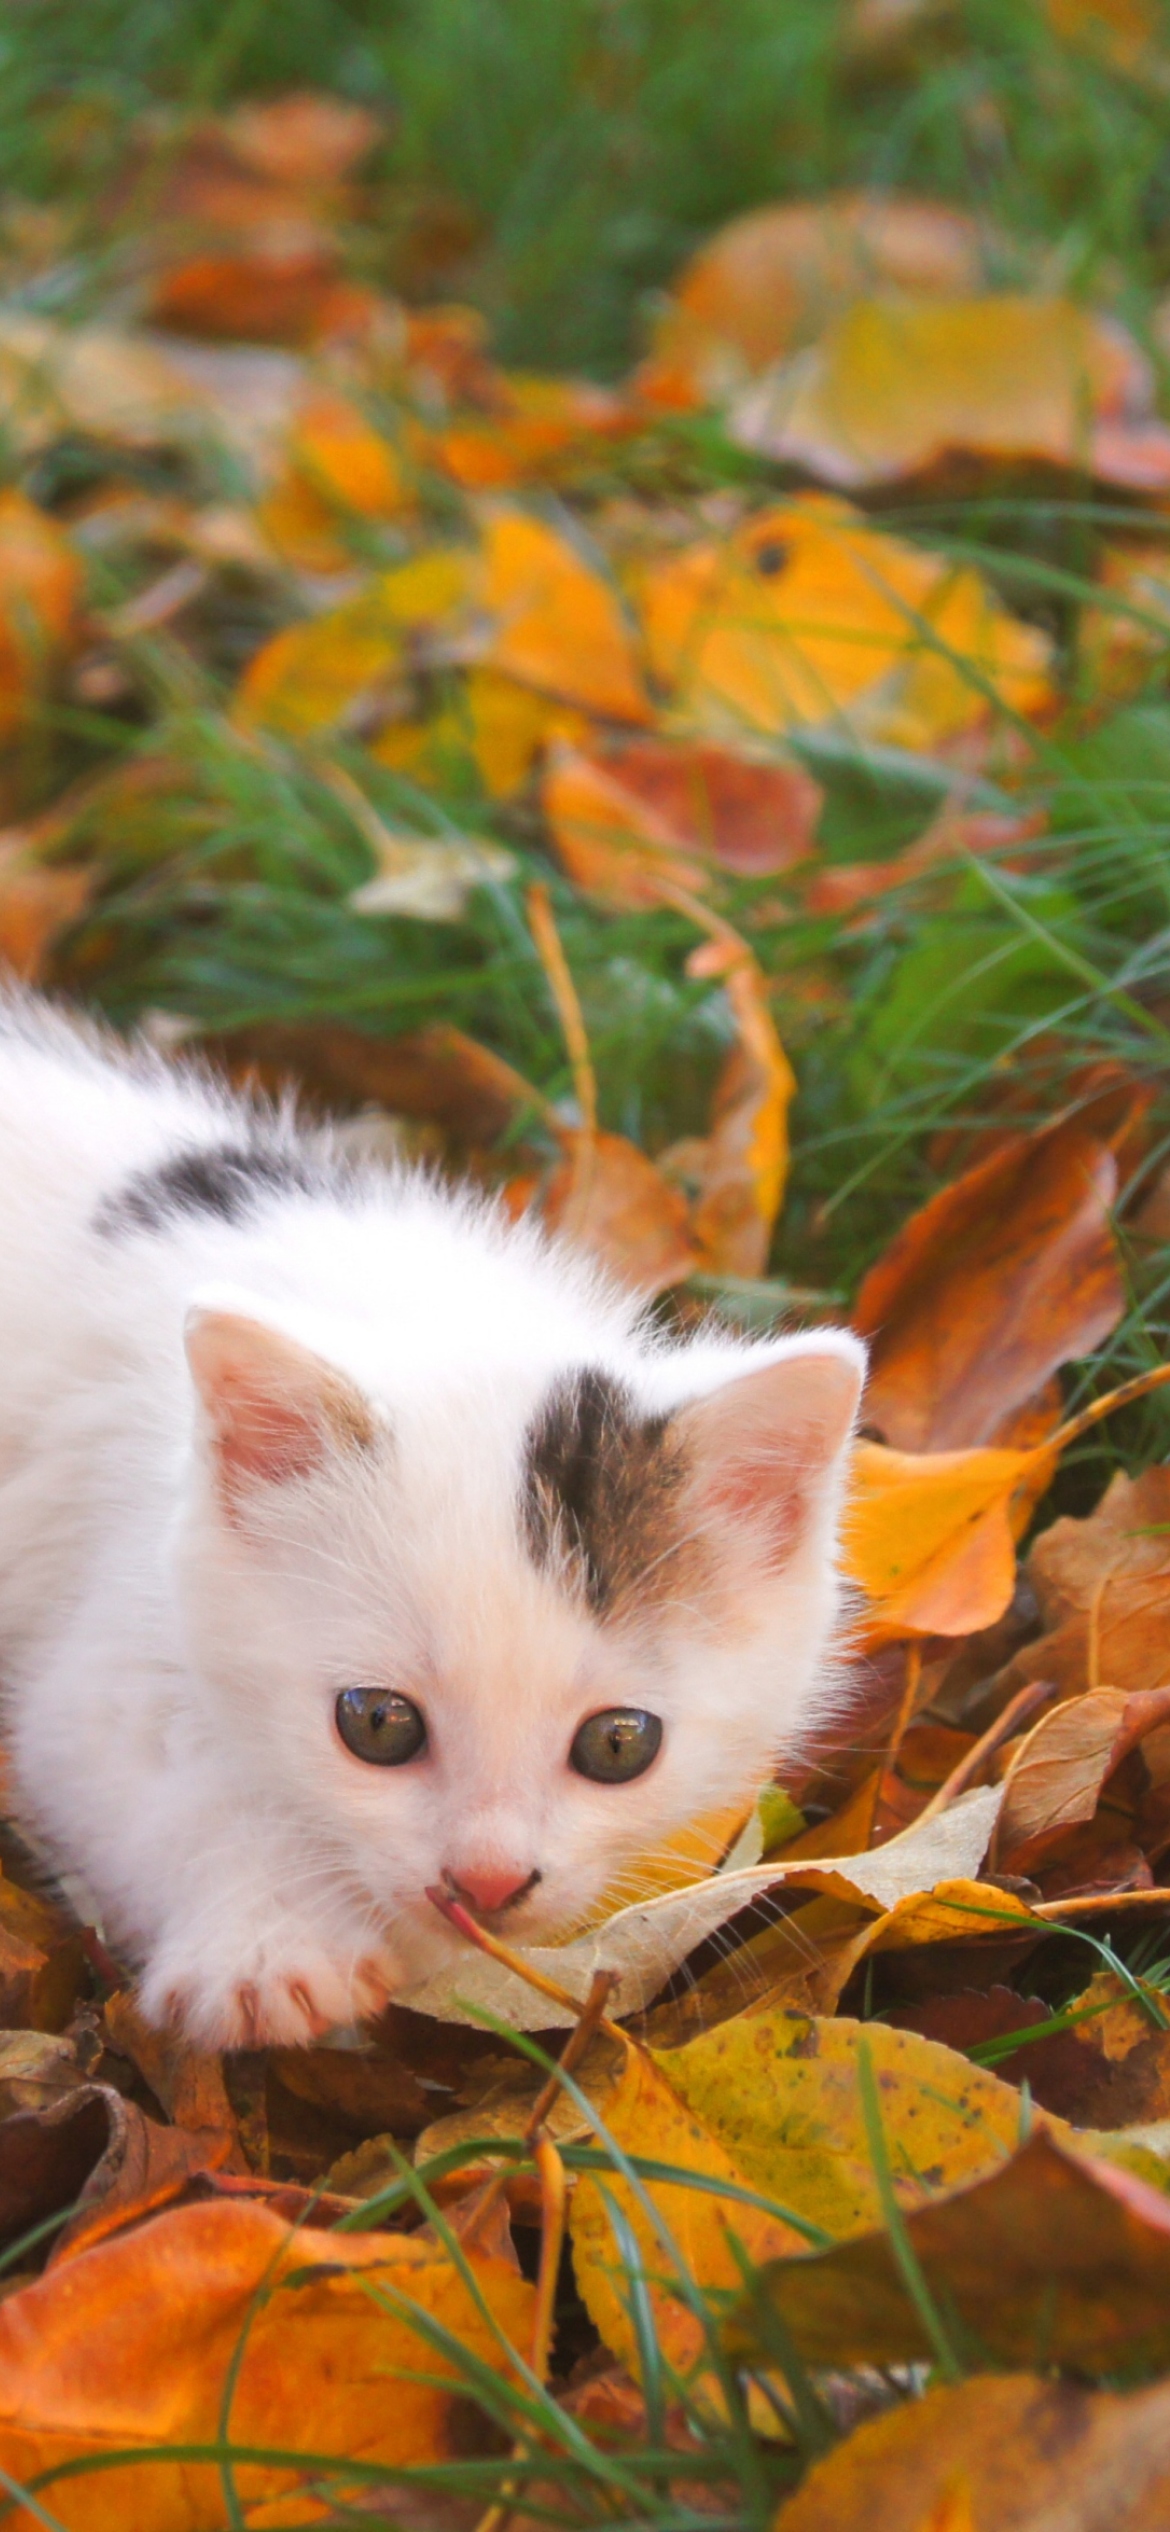 Kitty And Autumn Leaves wallpaper 1170x2532